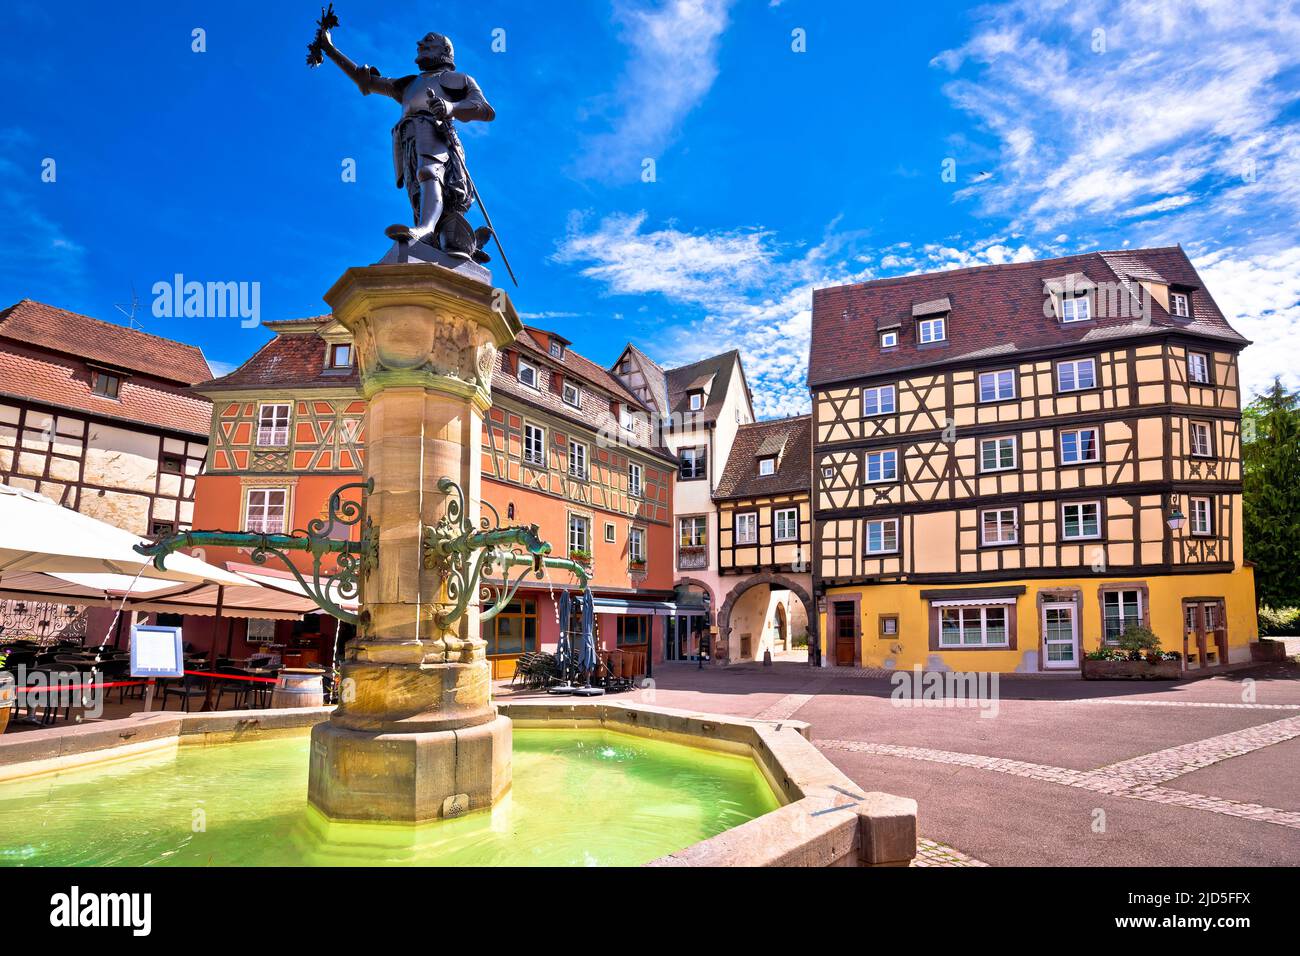 Colorful historic town of Colmar square and fountain view, Alsace region of France Stock Photo